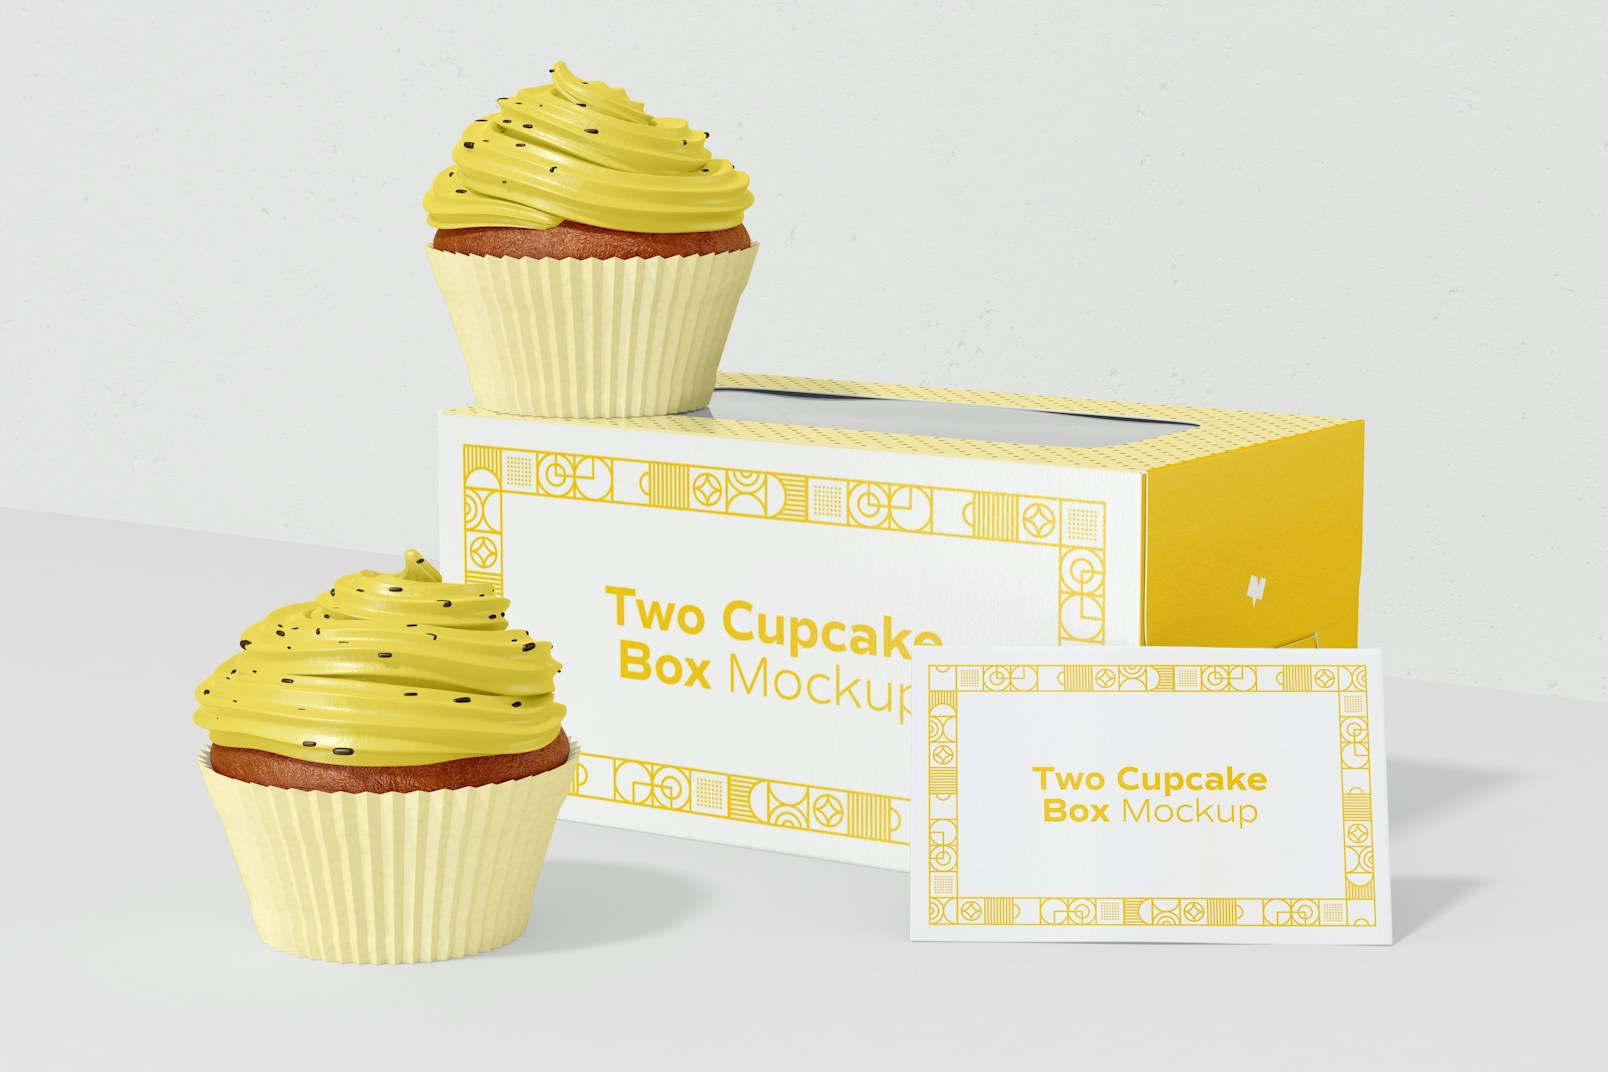 Two Cupcake Box Mockup, Perspective View